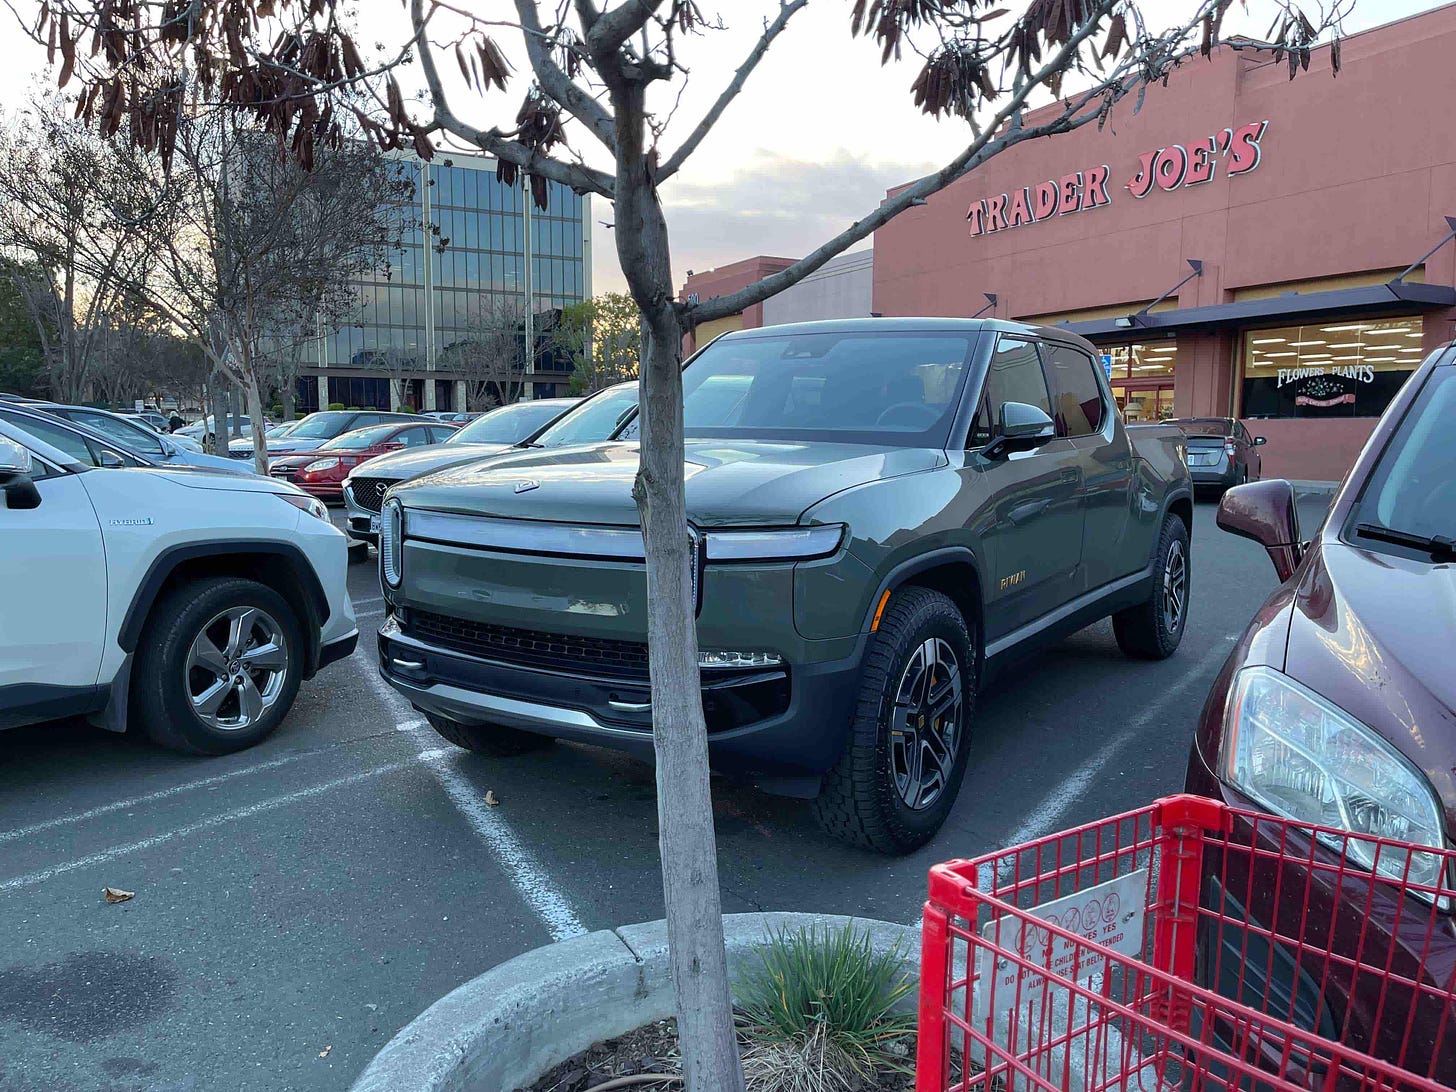 An image taken by the author of a Rivian pickup truck parked in front of a grocery store